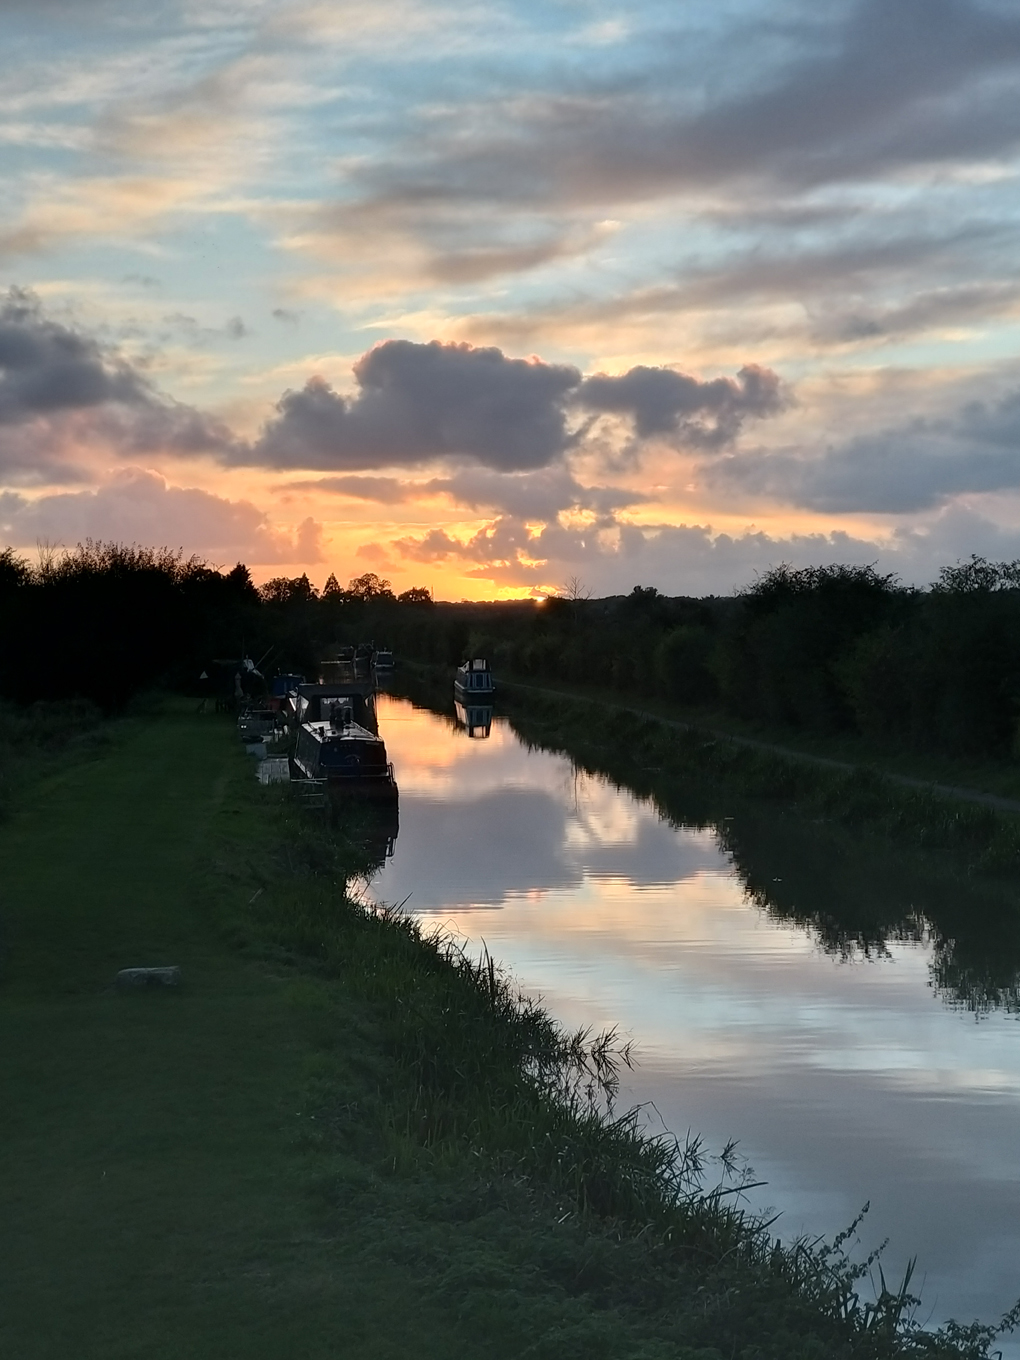 Sunset colours, clouds and hedges reflected in the canal